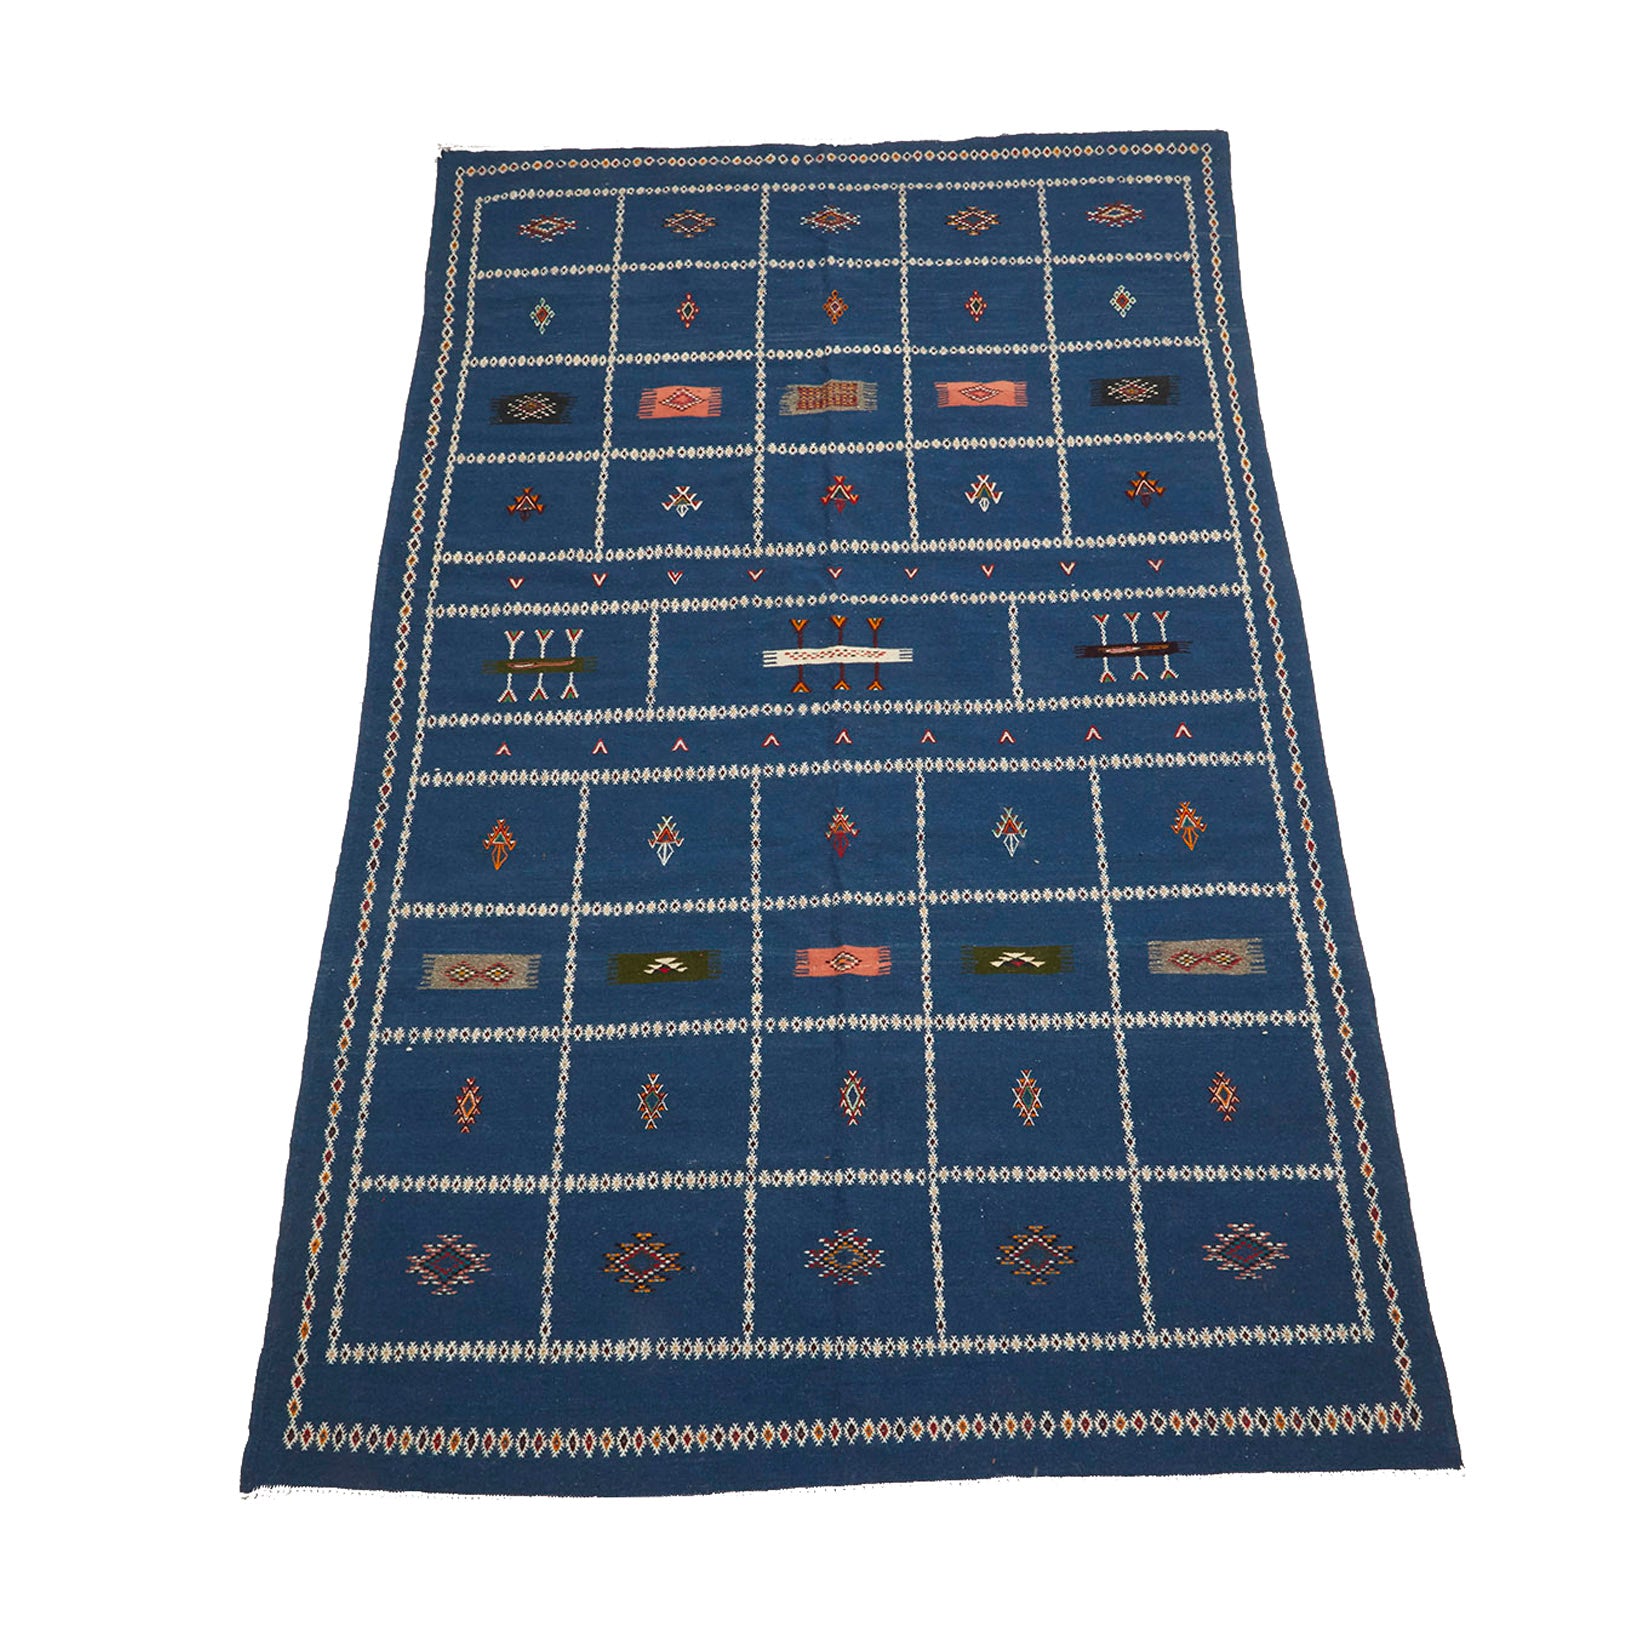 Blue Moroccan flatweave kilim rug with embroidered details - Kantara | Moroccan Rugs